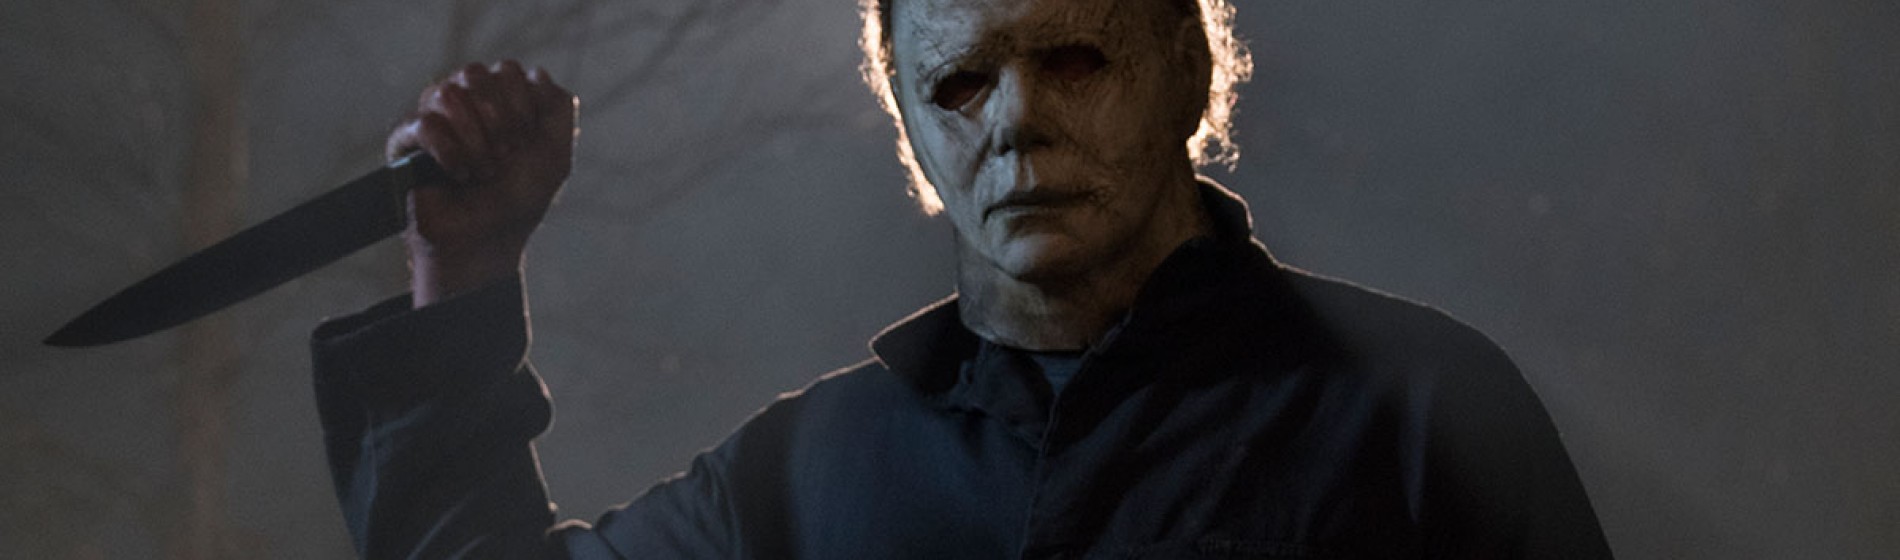 TIFF 2018 Halloween Review Featured